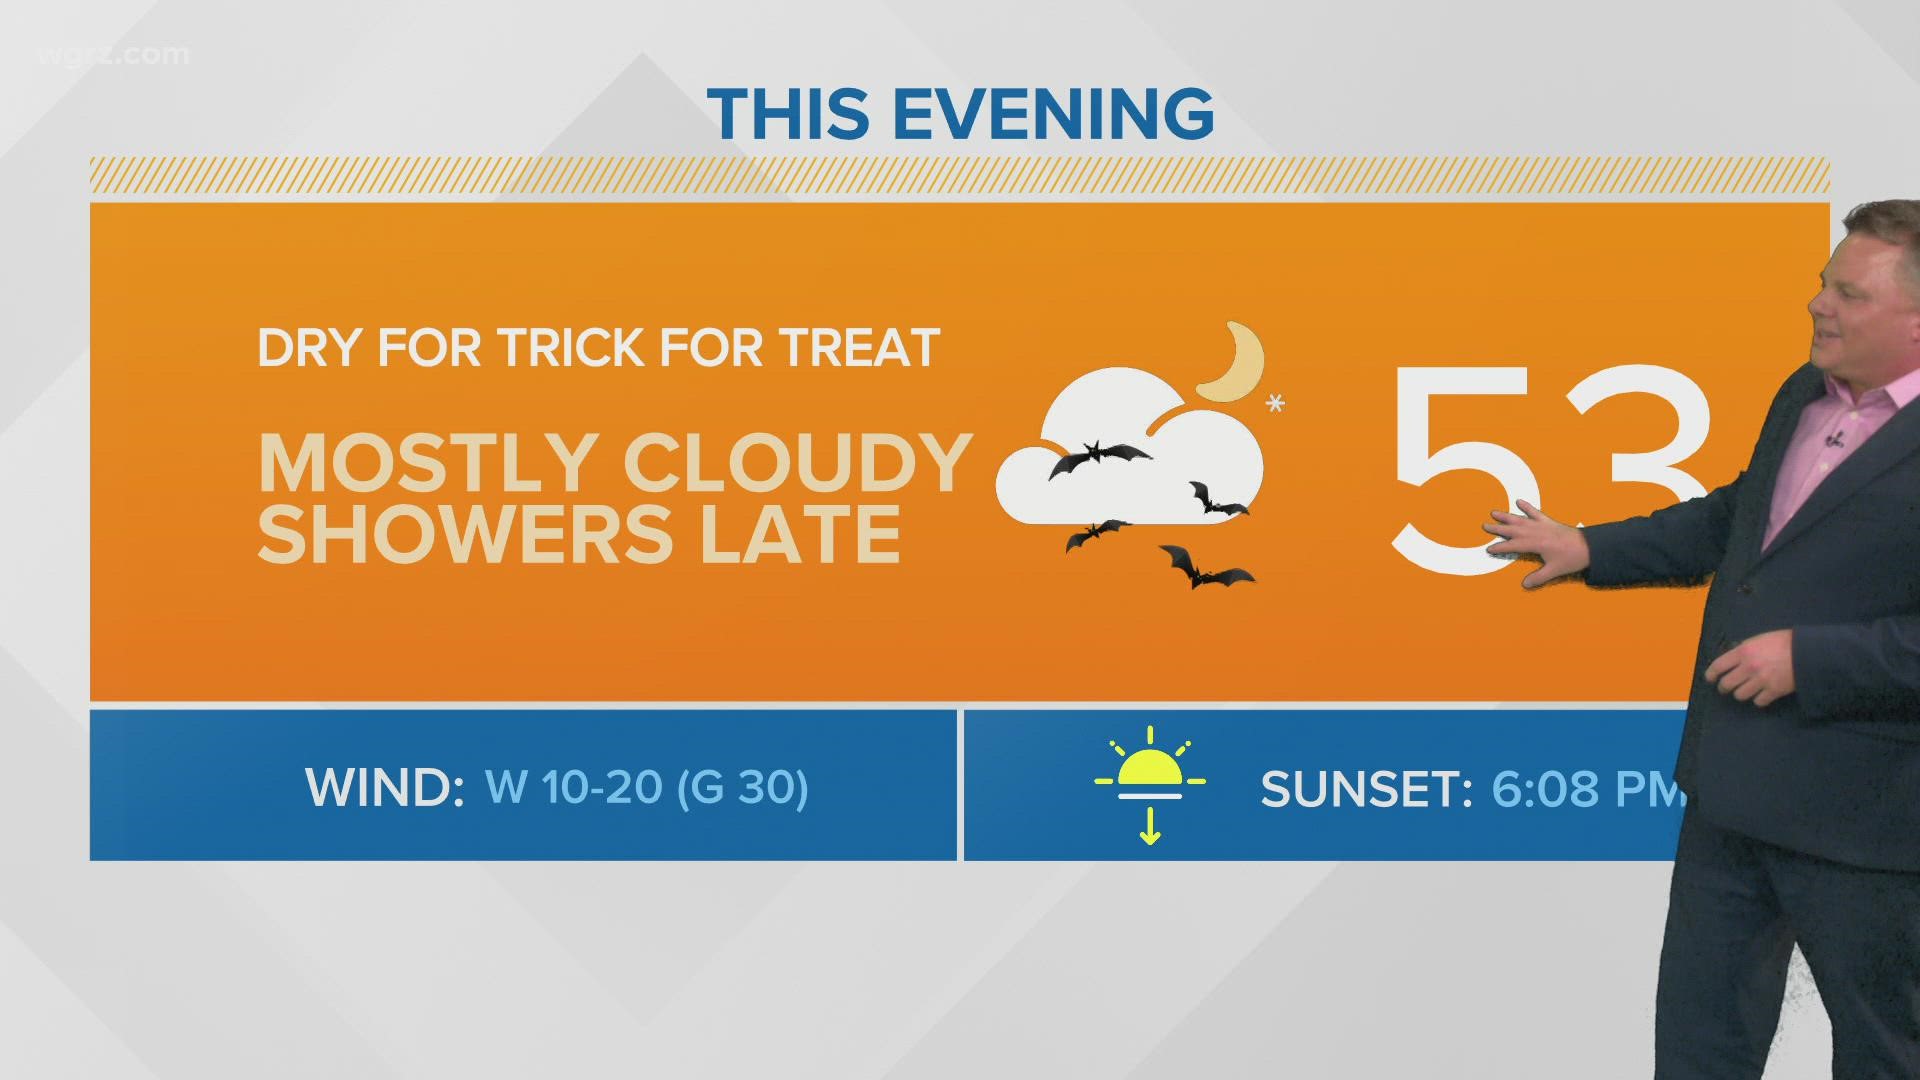 It will be mostly cloudy in the Buffalo metro area on Sunday, but there's a chance of showers late that night — but things look good for trick-or-treating.